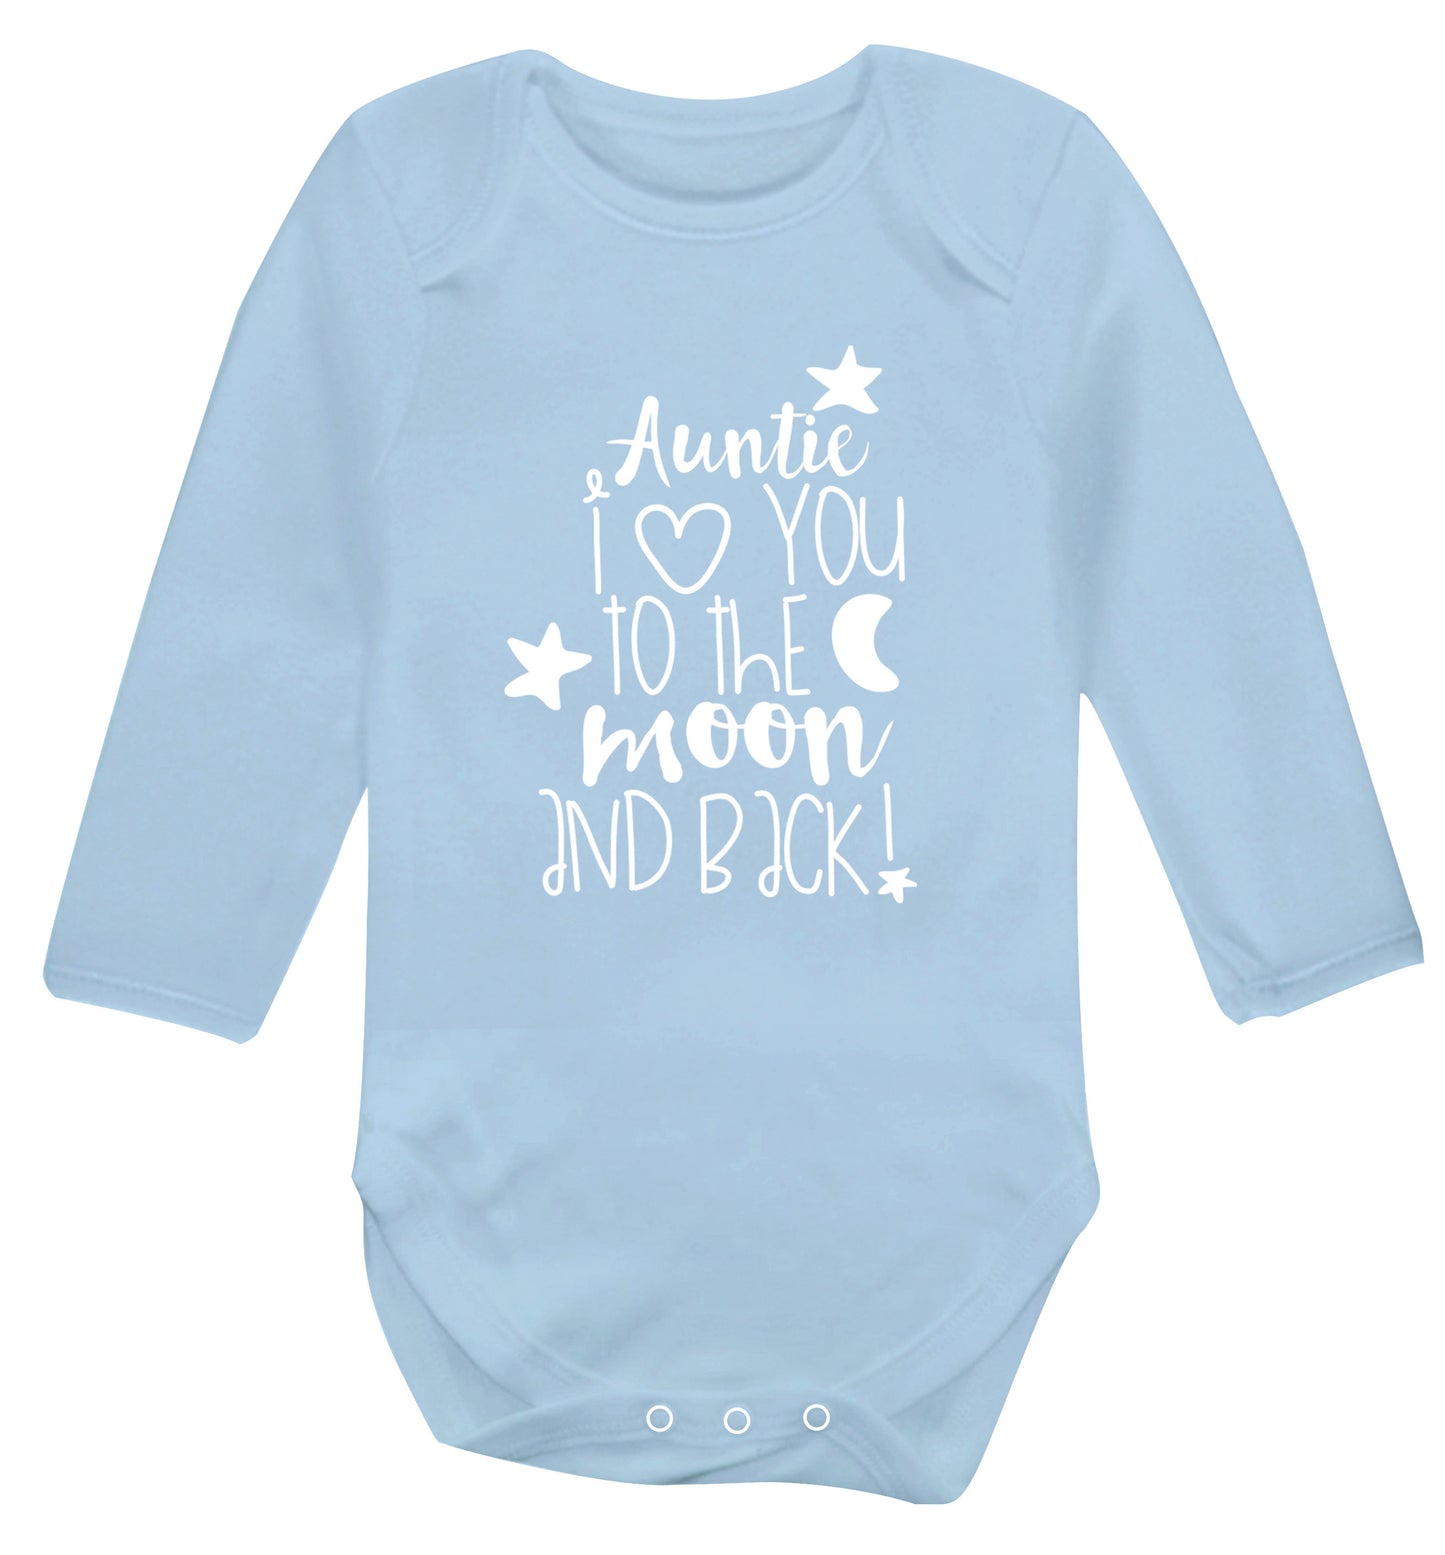 Auntie I love you to the moon and back Baby Vest long sleeved pale blue 6-12 months